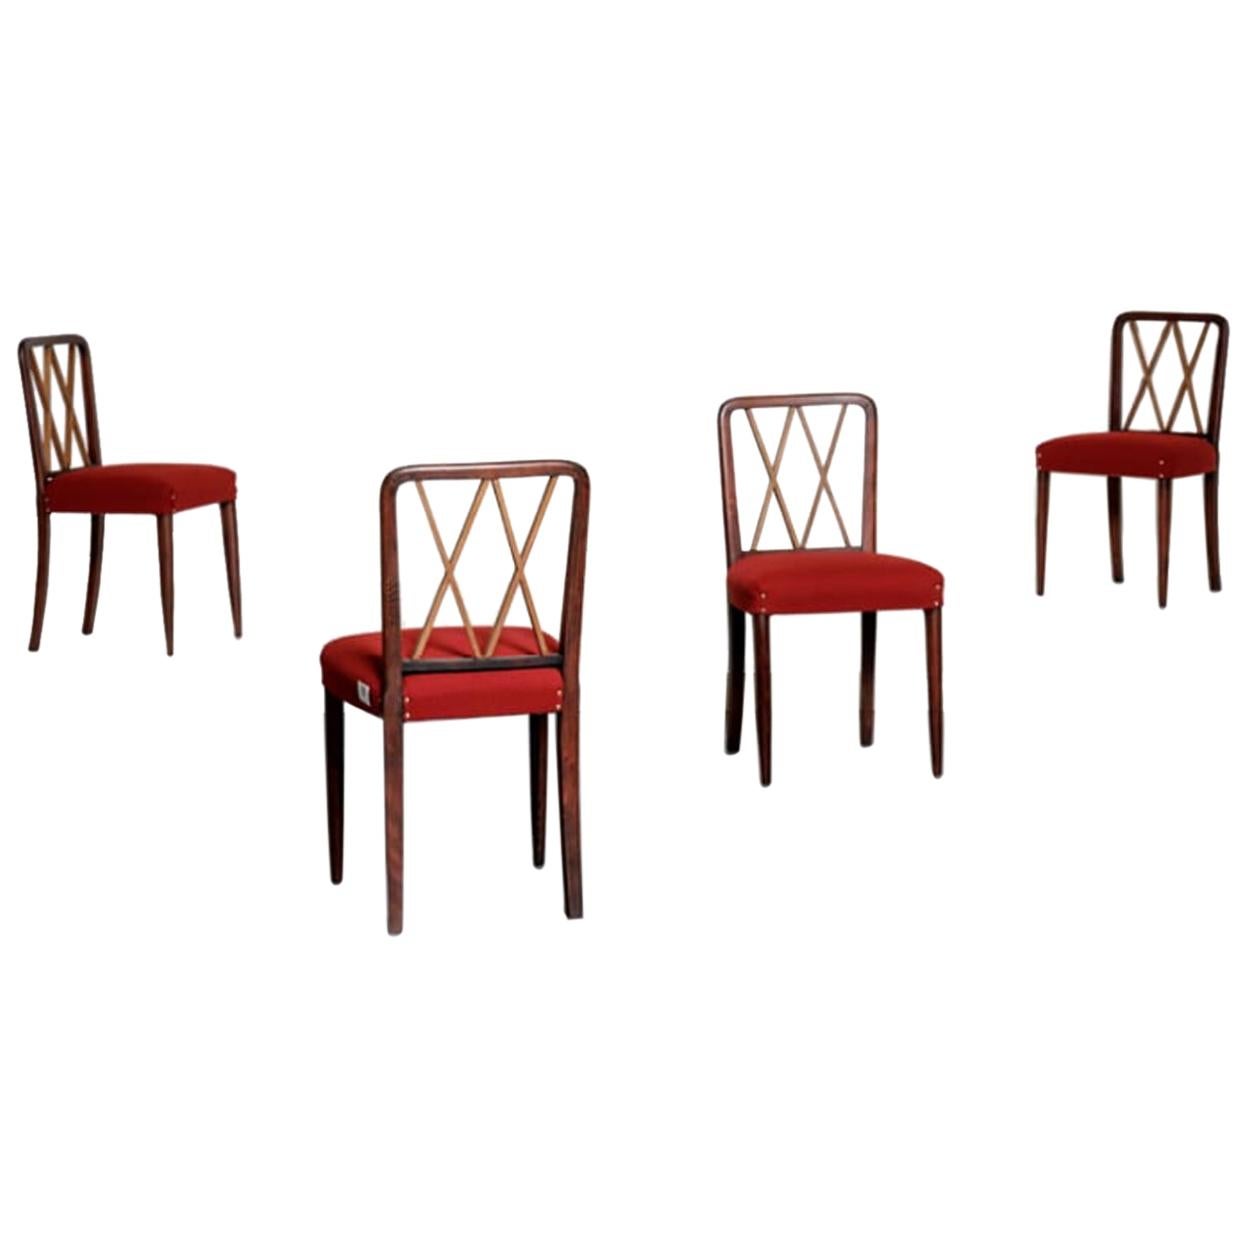 Set of Four Wooden Chairs by Gio Ponti 1950 Midcentury Style